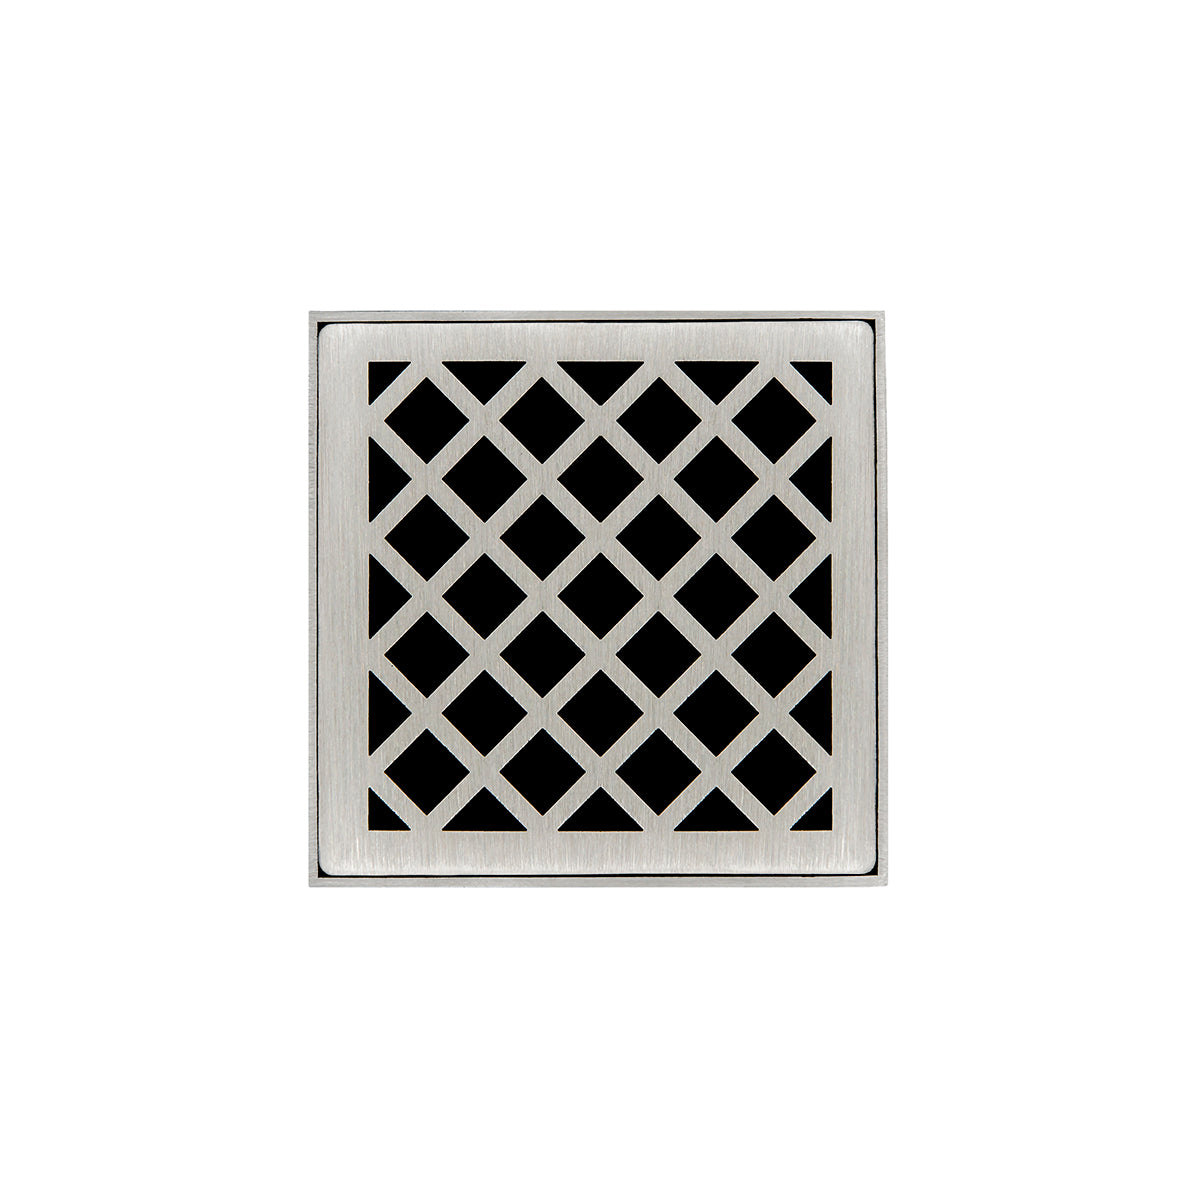 Infinity Drain 4" x 4" Strainer Premium Center Drain Kit with Criss-Cross Pattern Decorative Plate and 2" Throat for XD 4